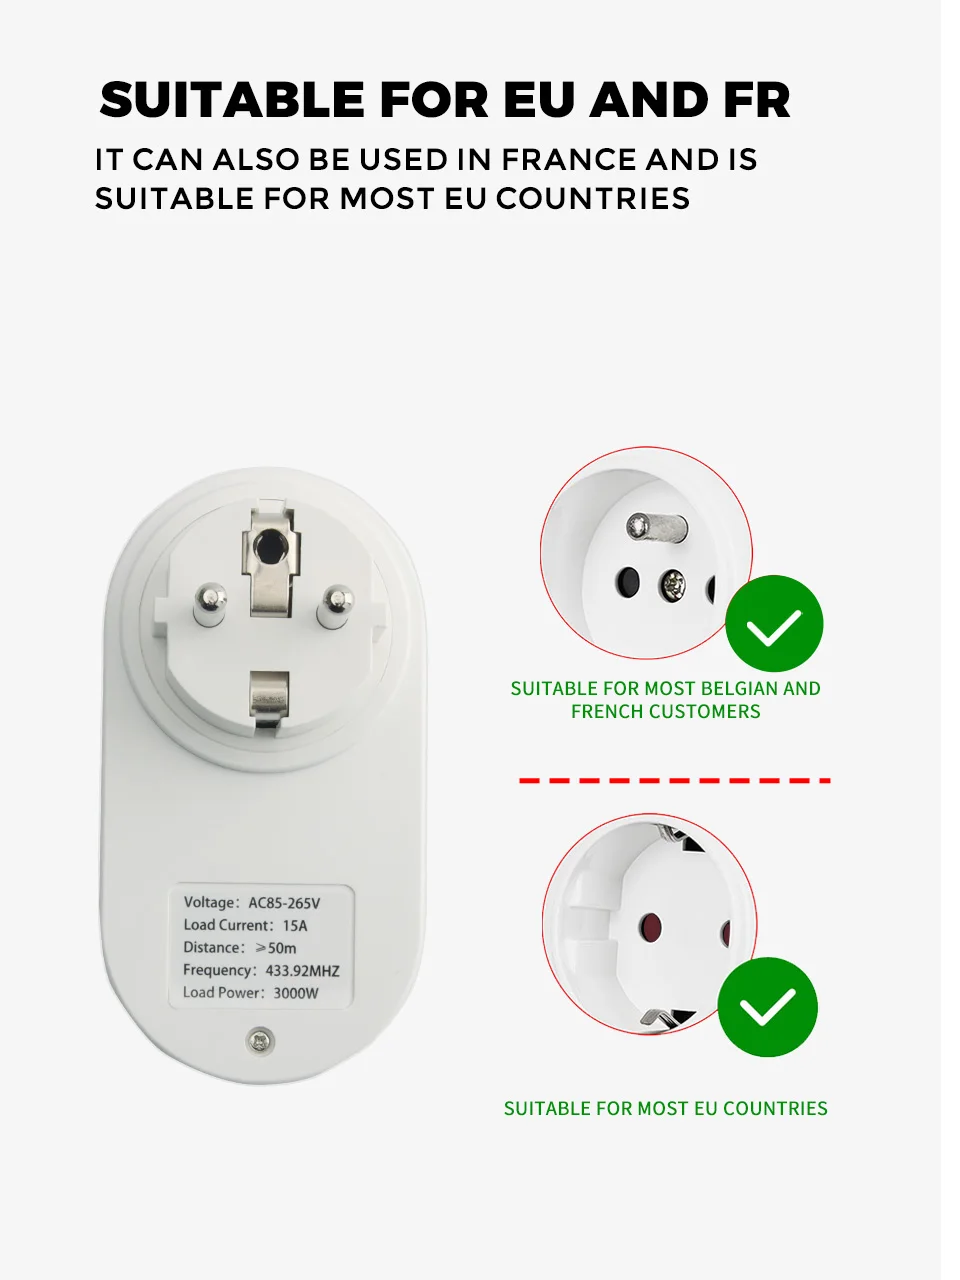 He1171c4a0b034d9fb85b99fb3e0c5489i SMATRUL Wireless Remote Control Smart Socket 15A EU FR Universal Plug 433mhz Wall Programmable Electrical Outlet Switch 220v LED